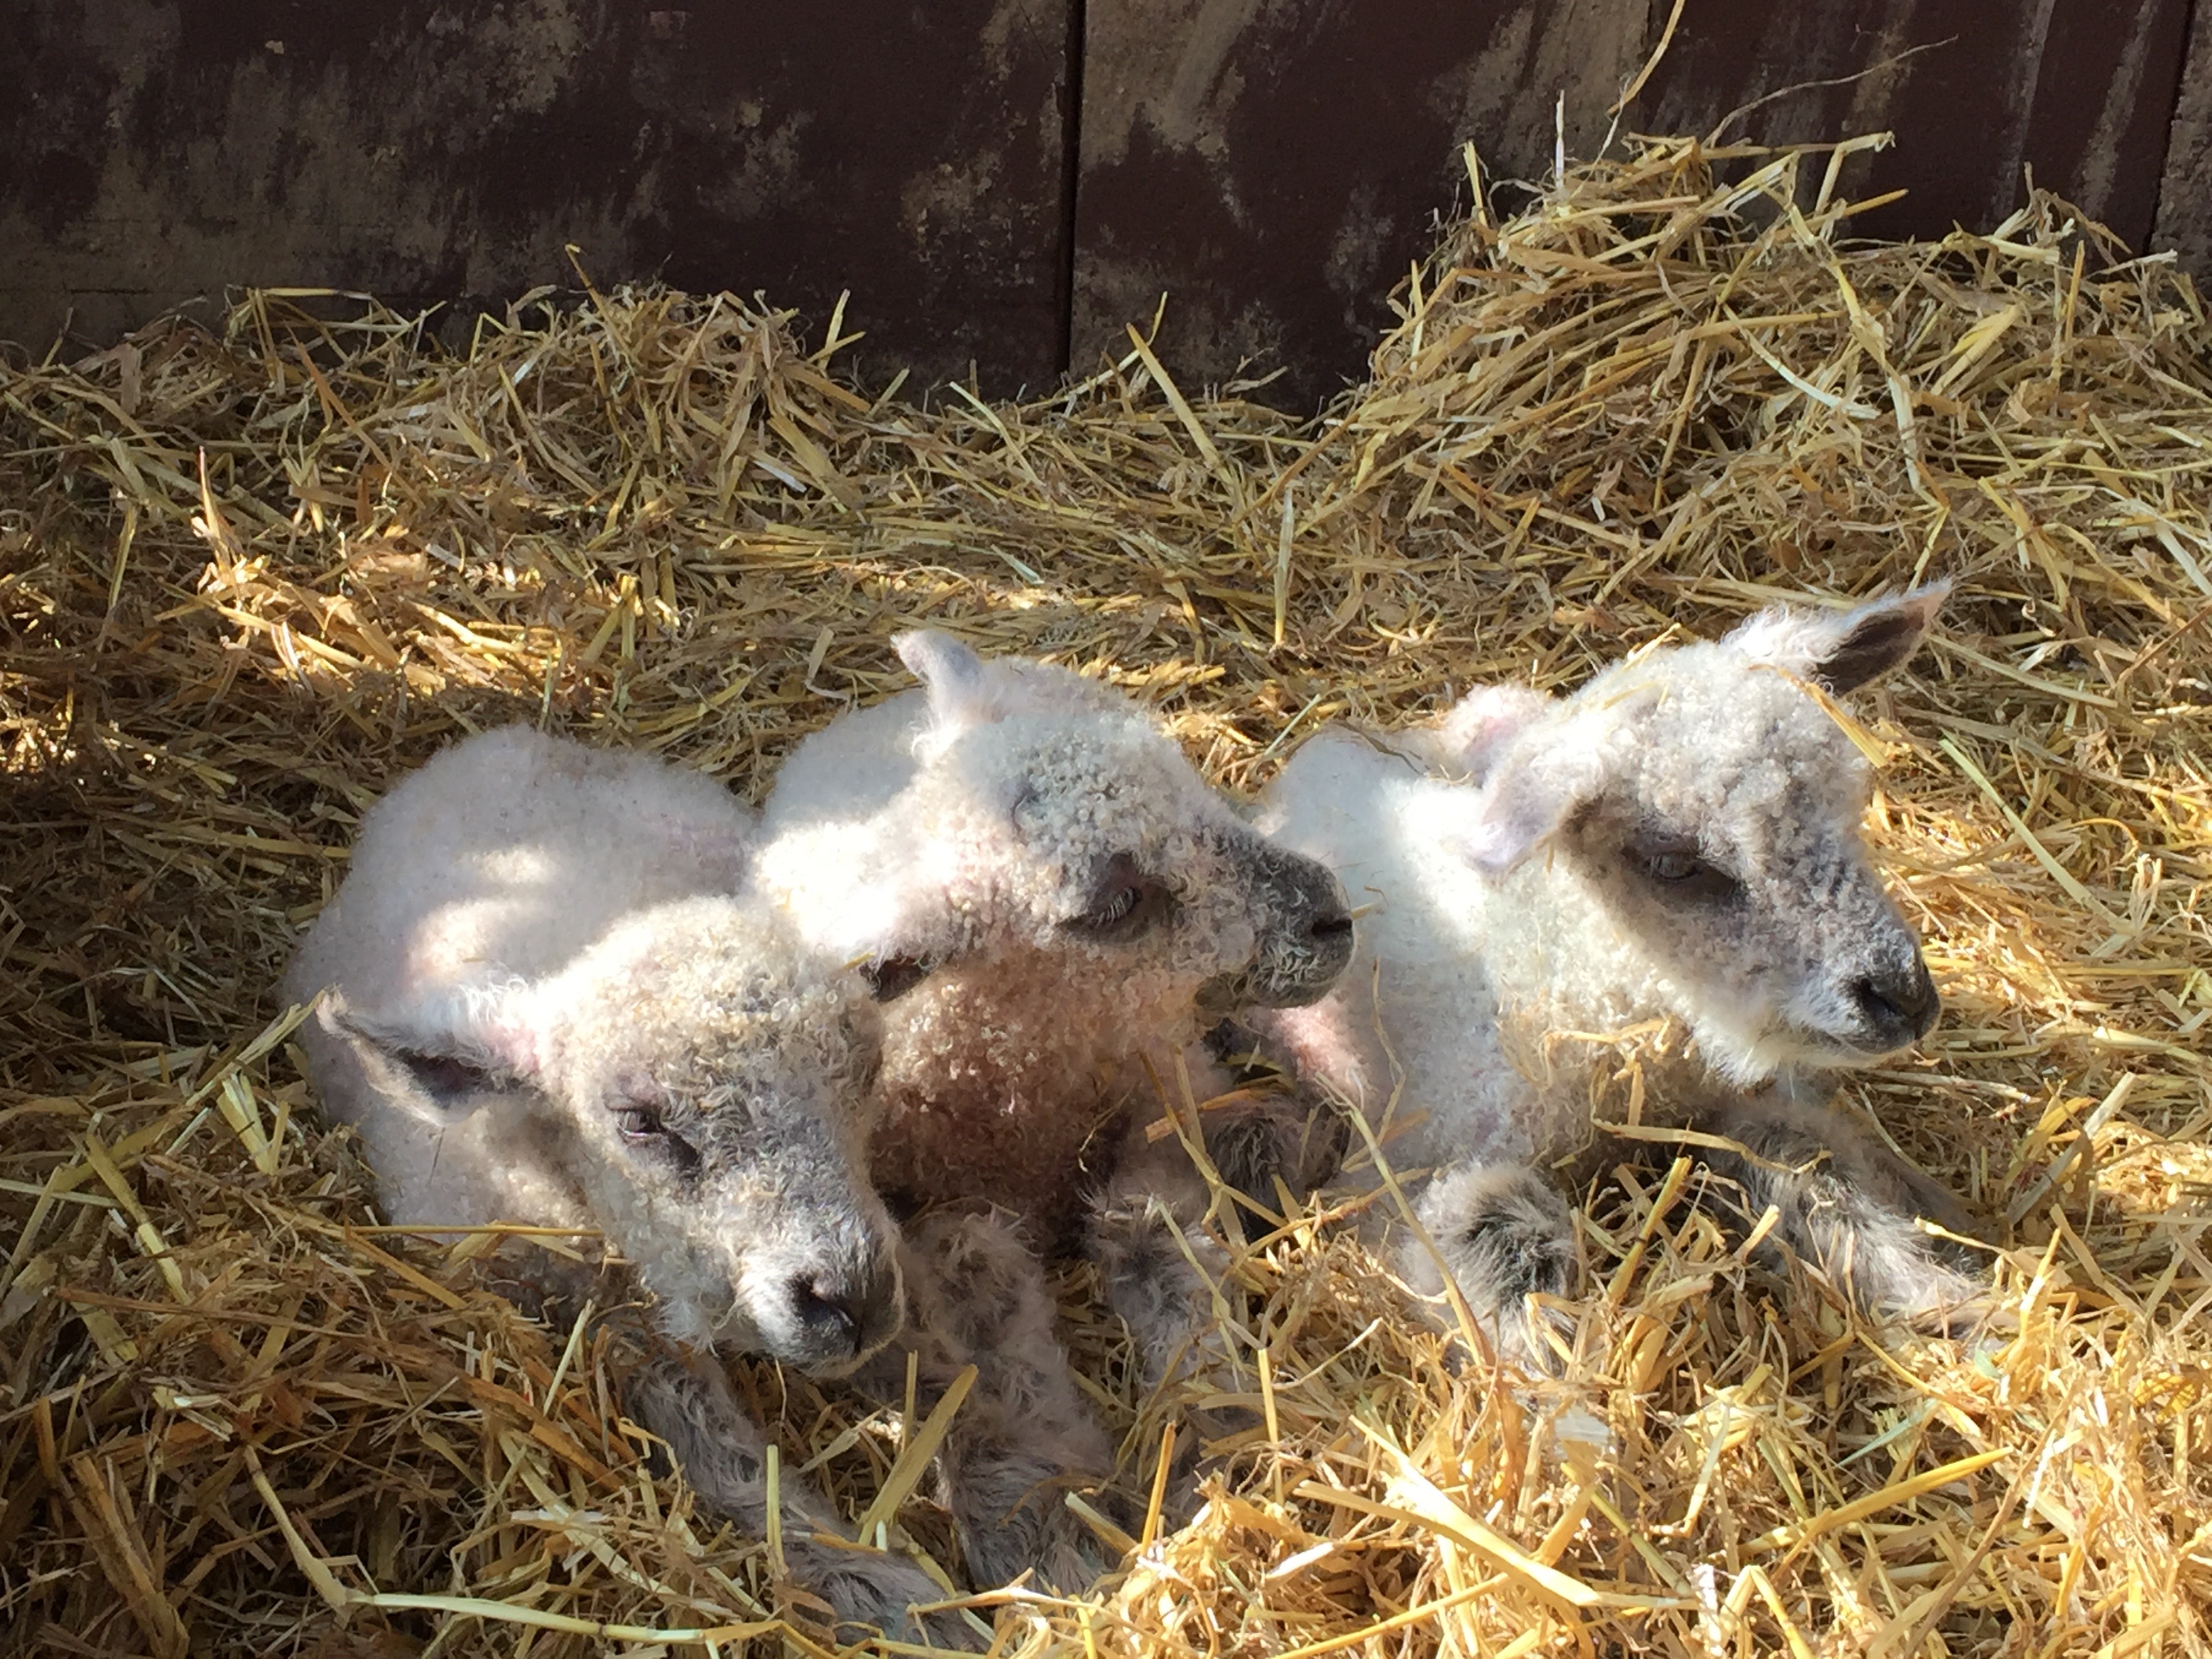 The bouncing triplets - less than one hour old!